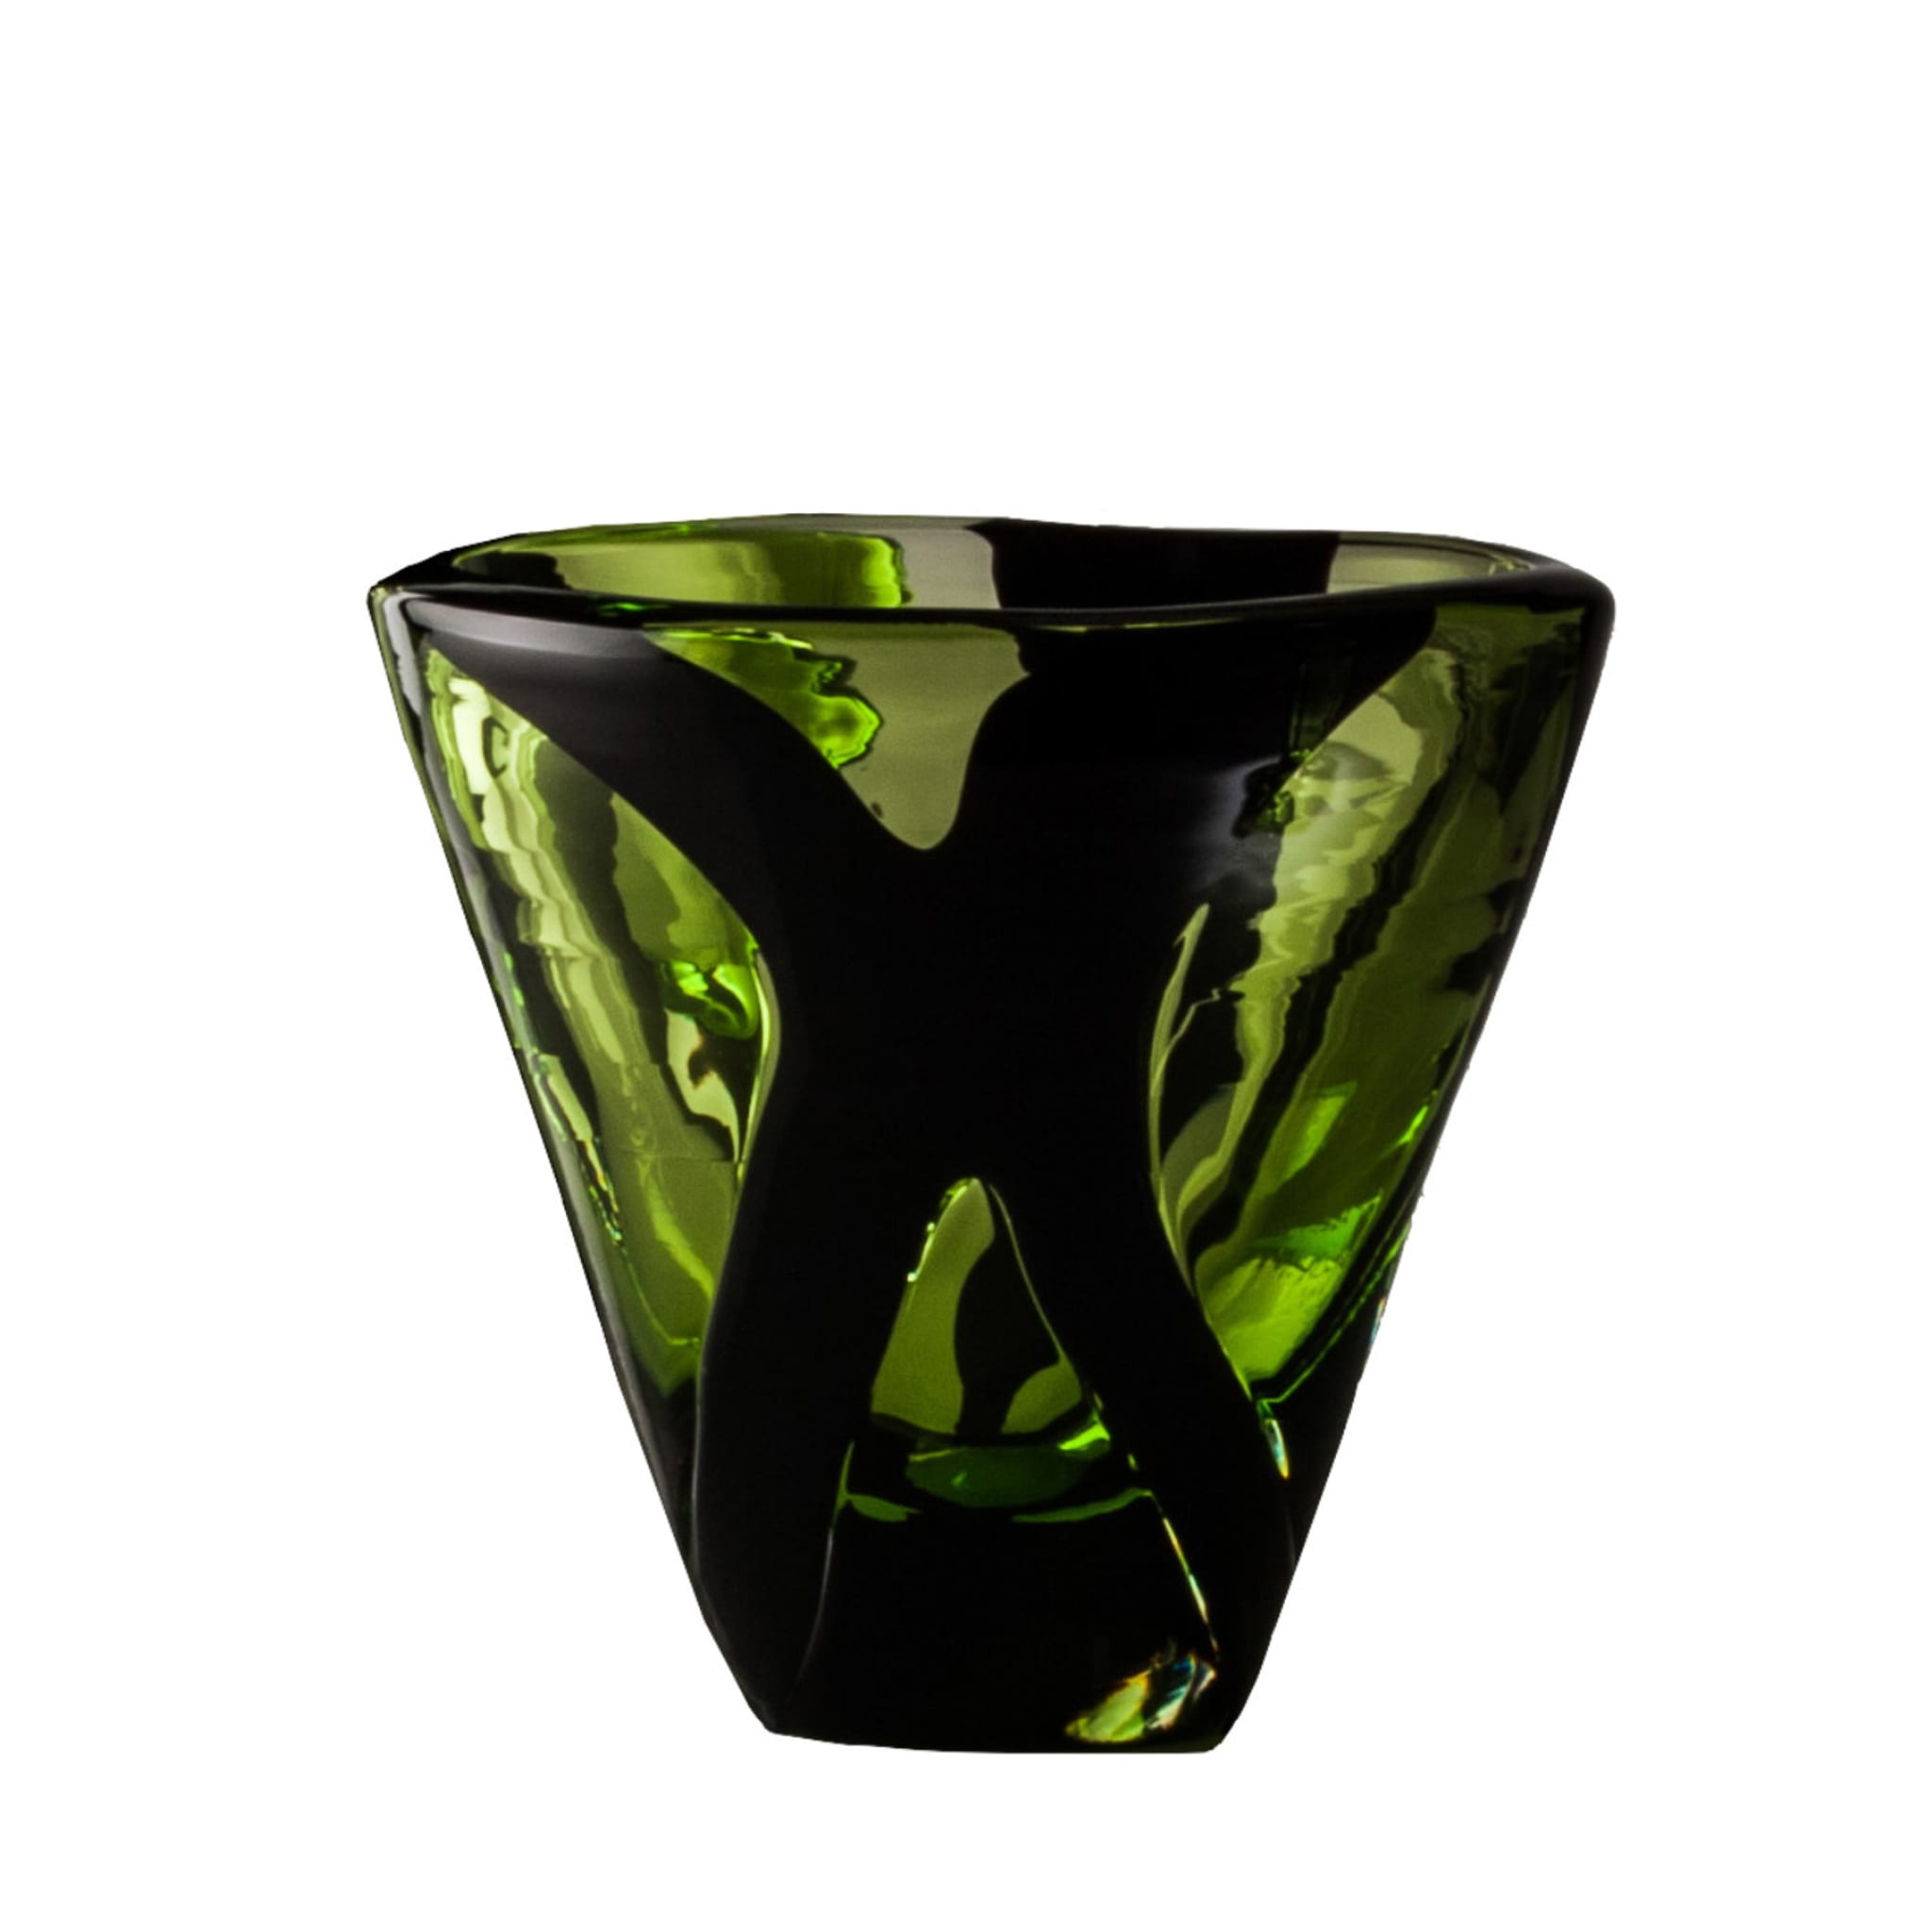 Black Belt Small Oval Vase by Peter Marino in Green - Main view